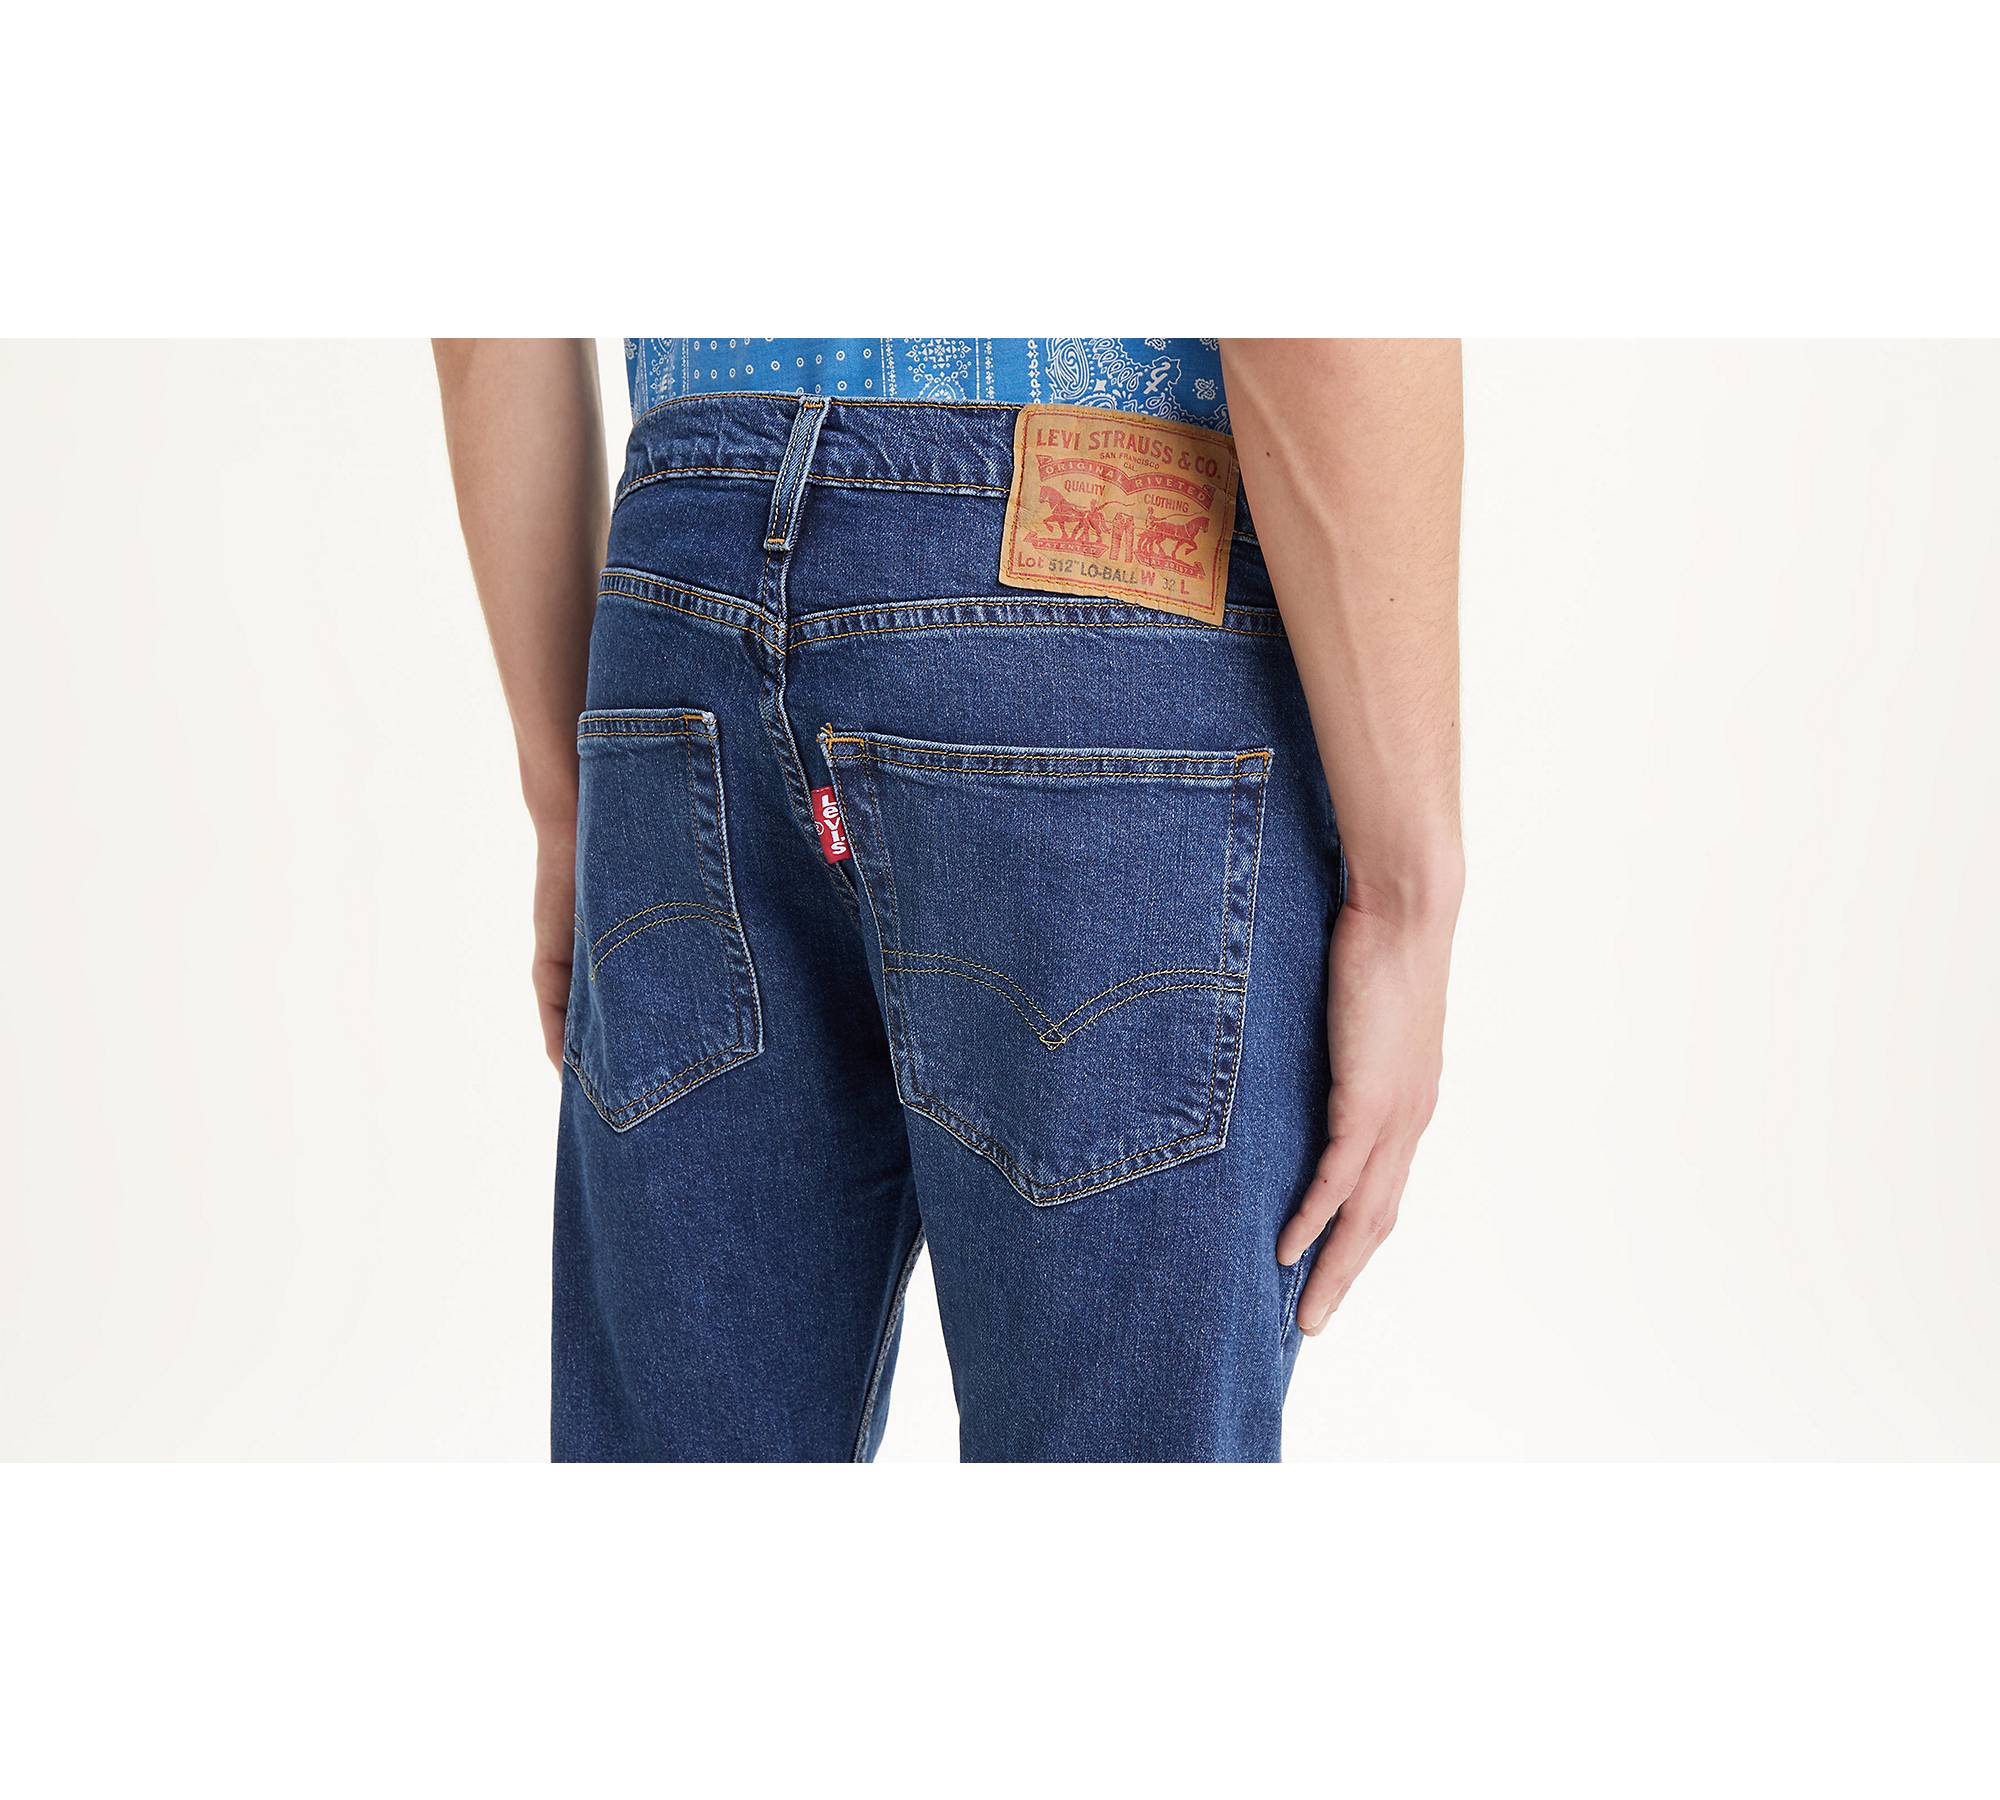 512™ Slim Tapered Lo-ball Jeans - Blue | Levi's® GB